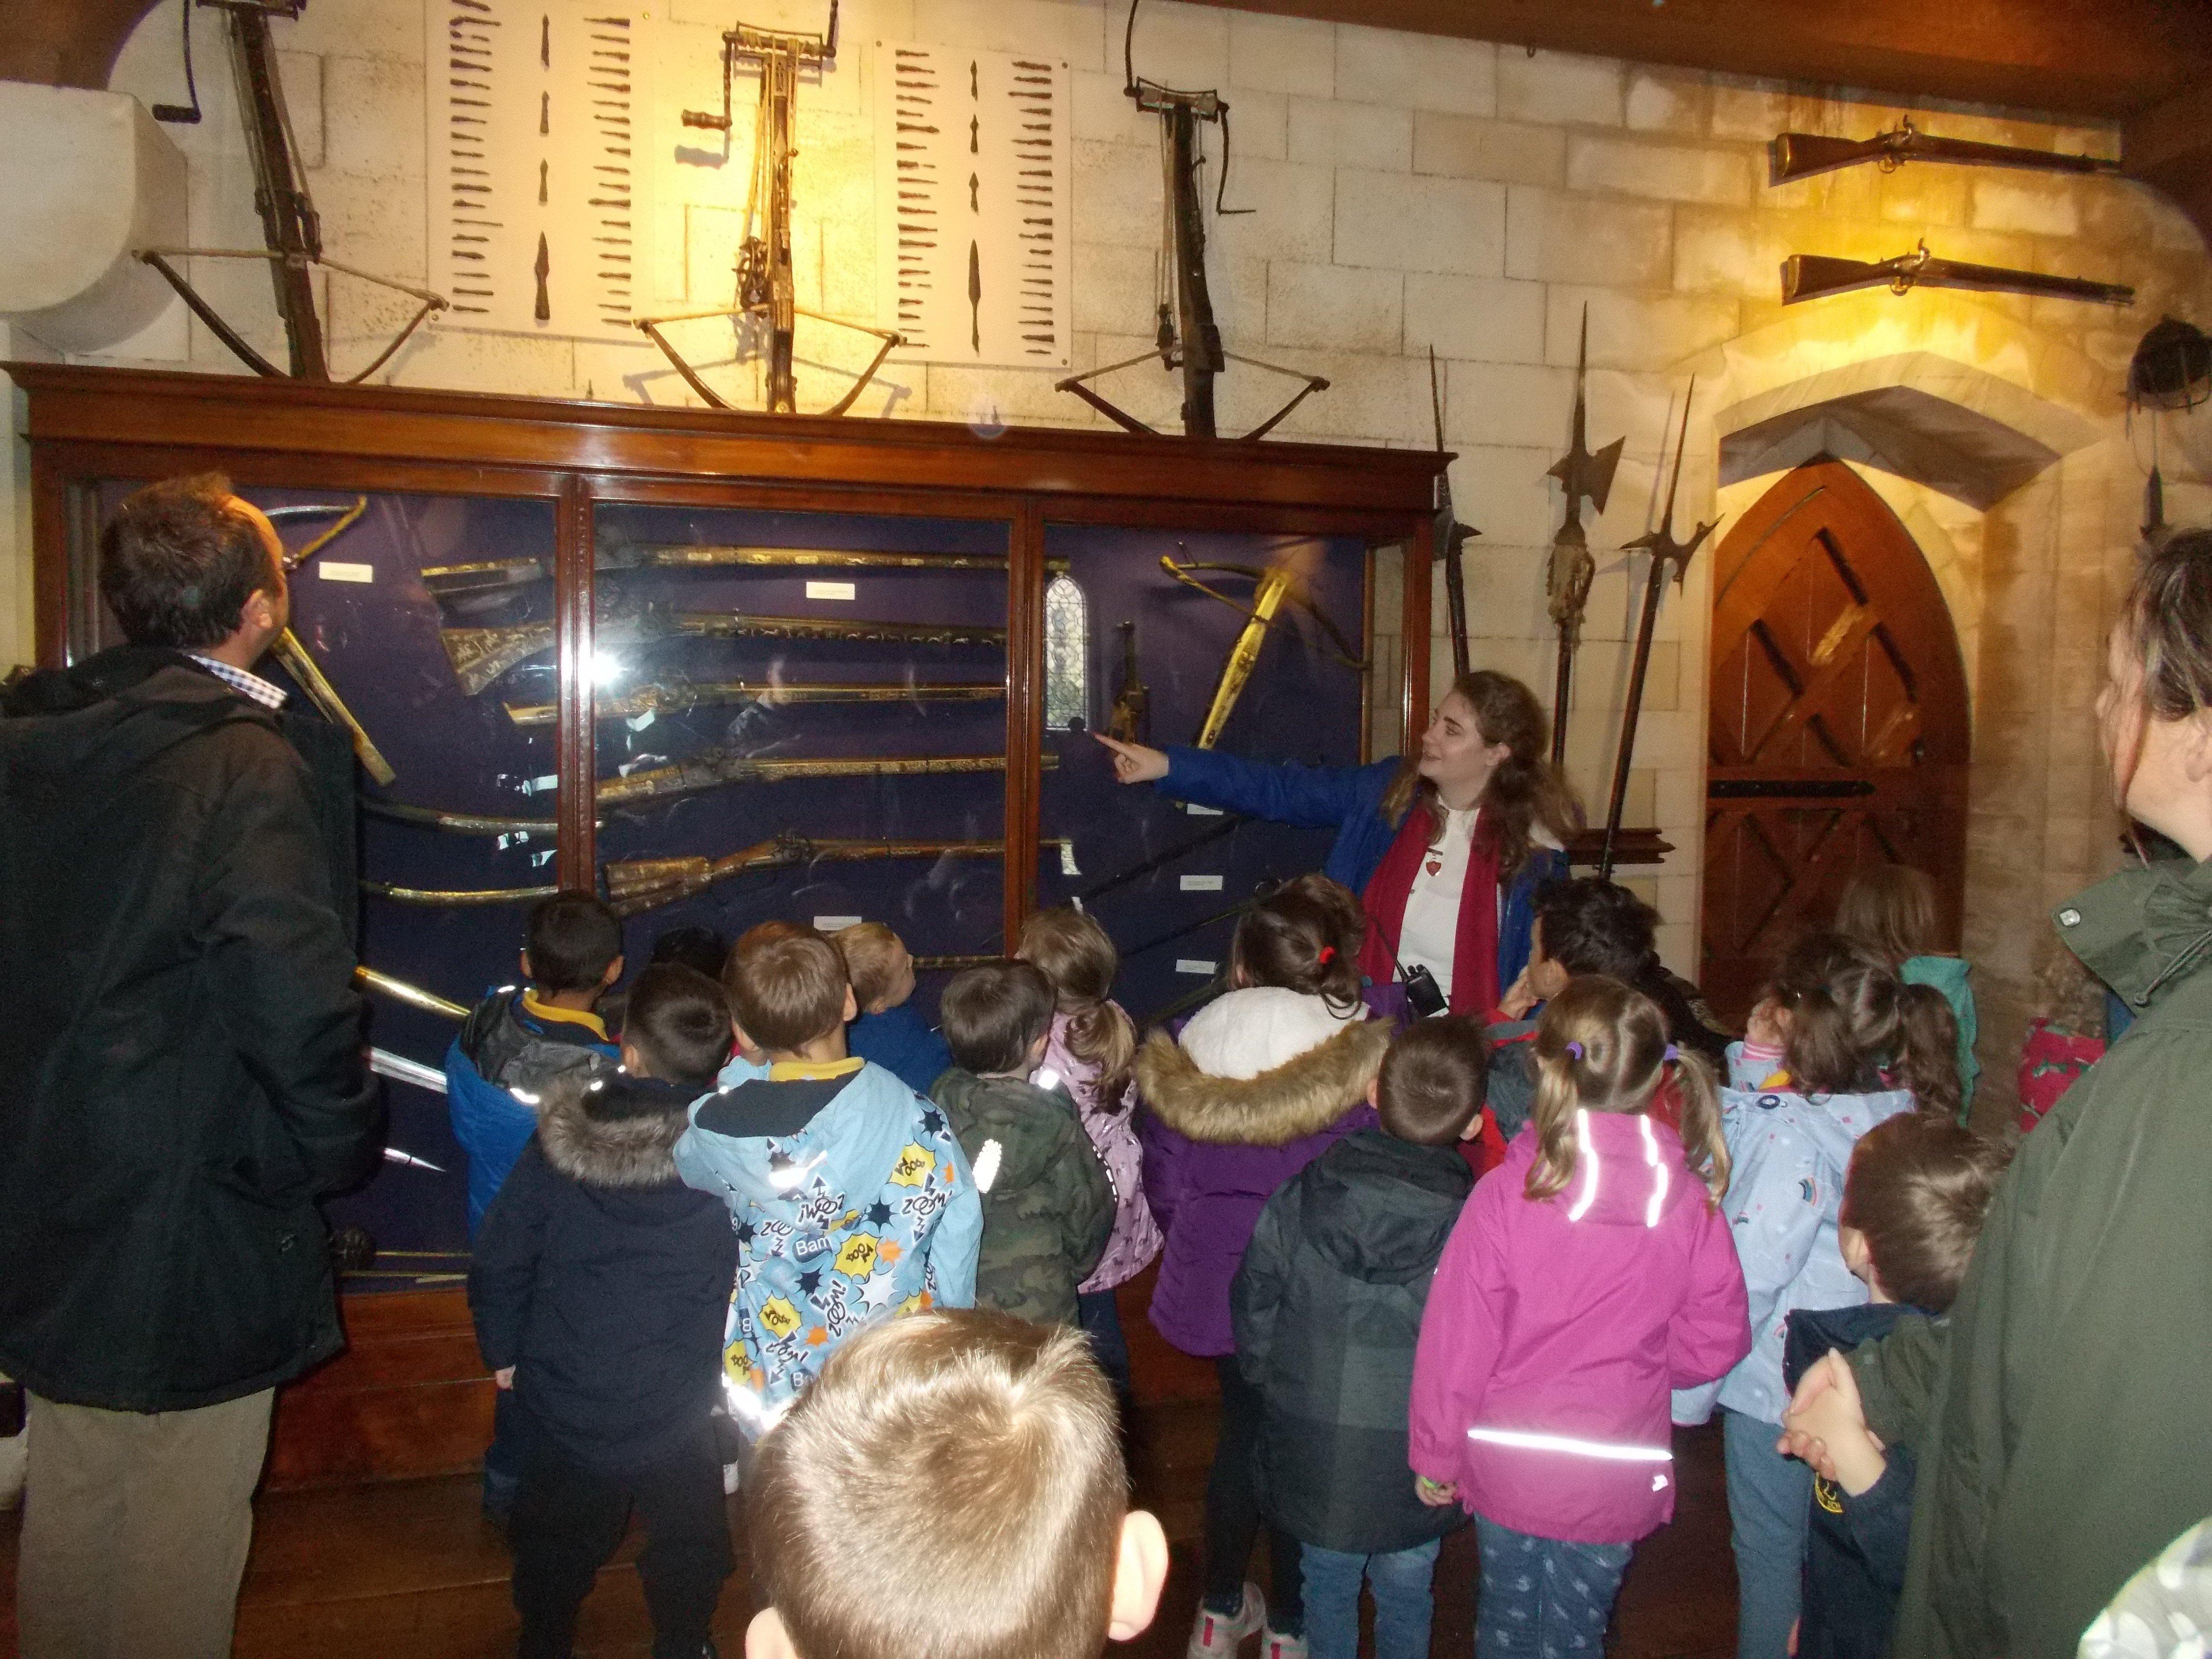 Key stage one children at Upper Beeding Primary School visited Arundel Castle as part of their Castles and Dragons topic